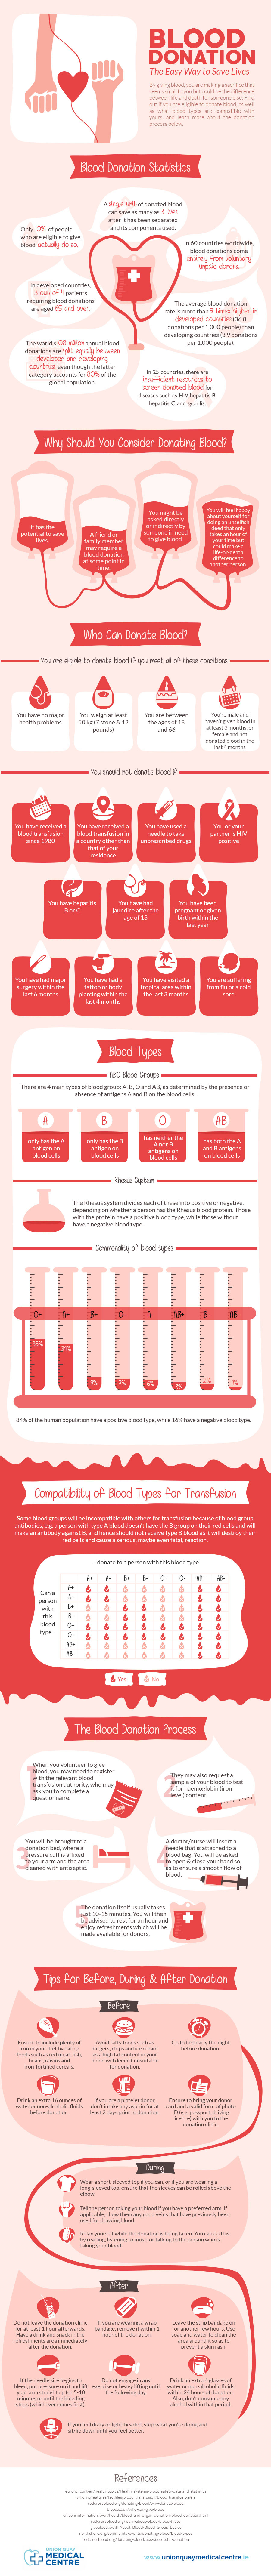 Blood Donation Infographic - Union Quay Medical Centre - Blood Donor Mobile